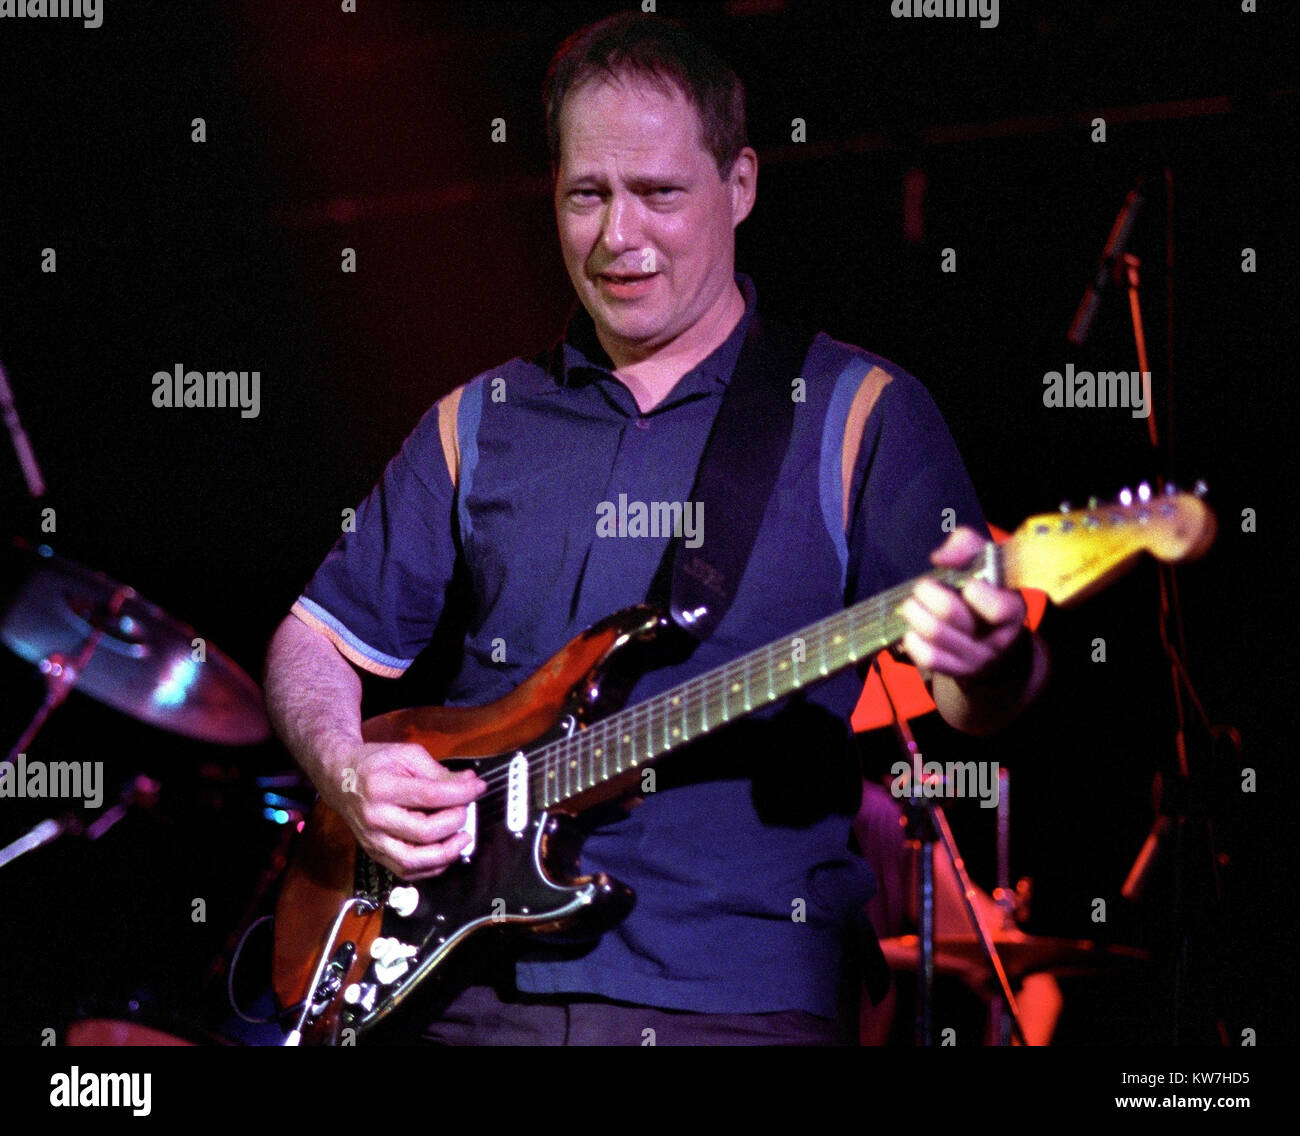 New wave rock band Television in concert at Manchester, UK, June 2005. Guitarist Richard Lloyd. Stock Photo